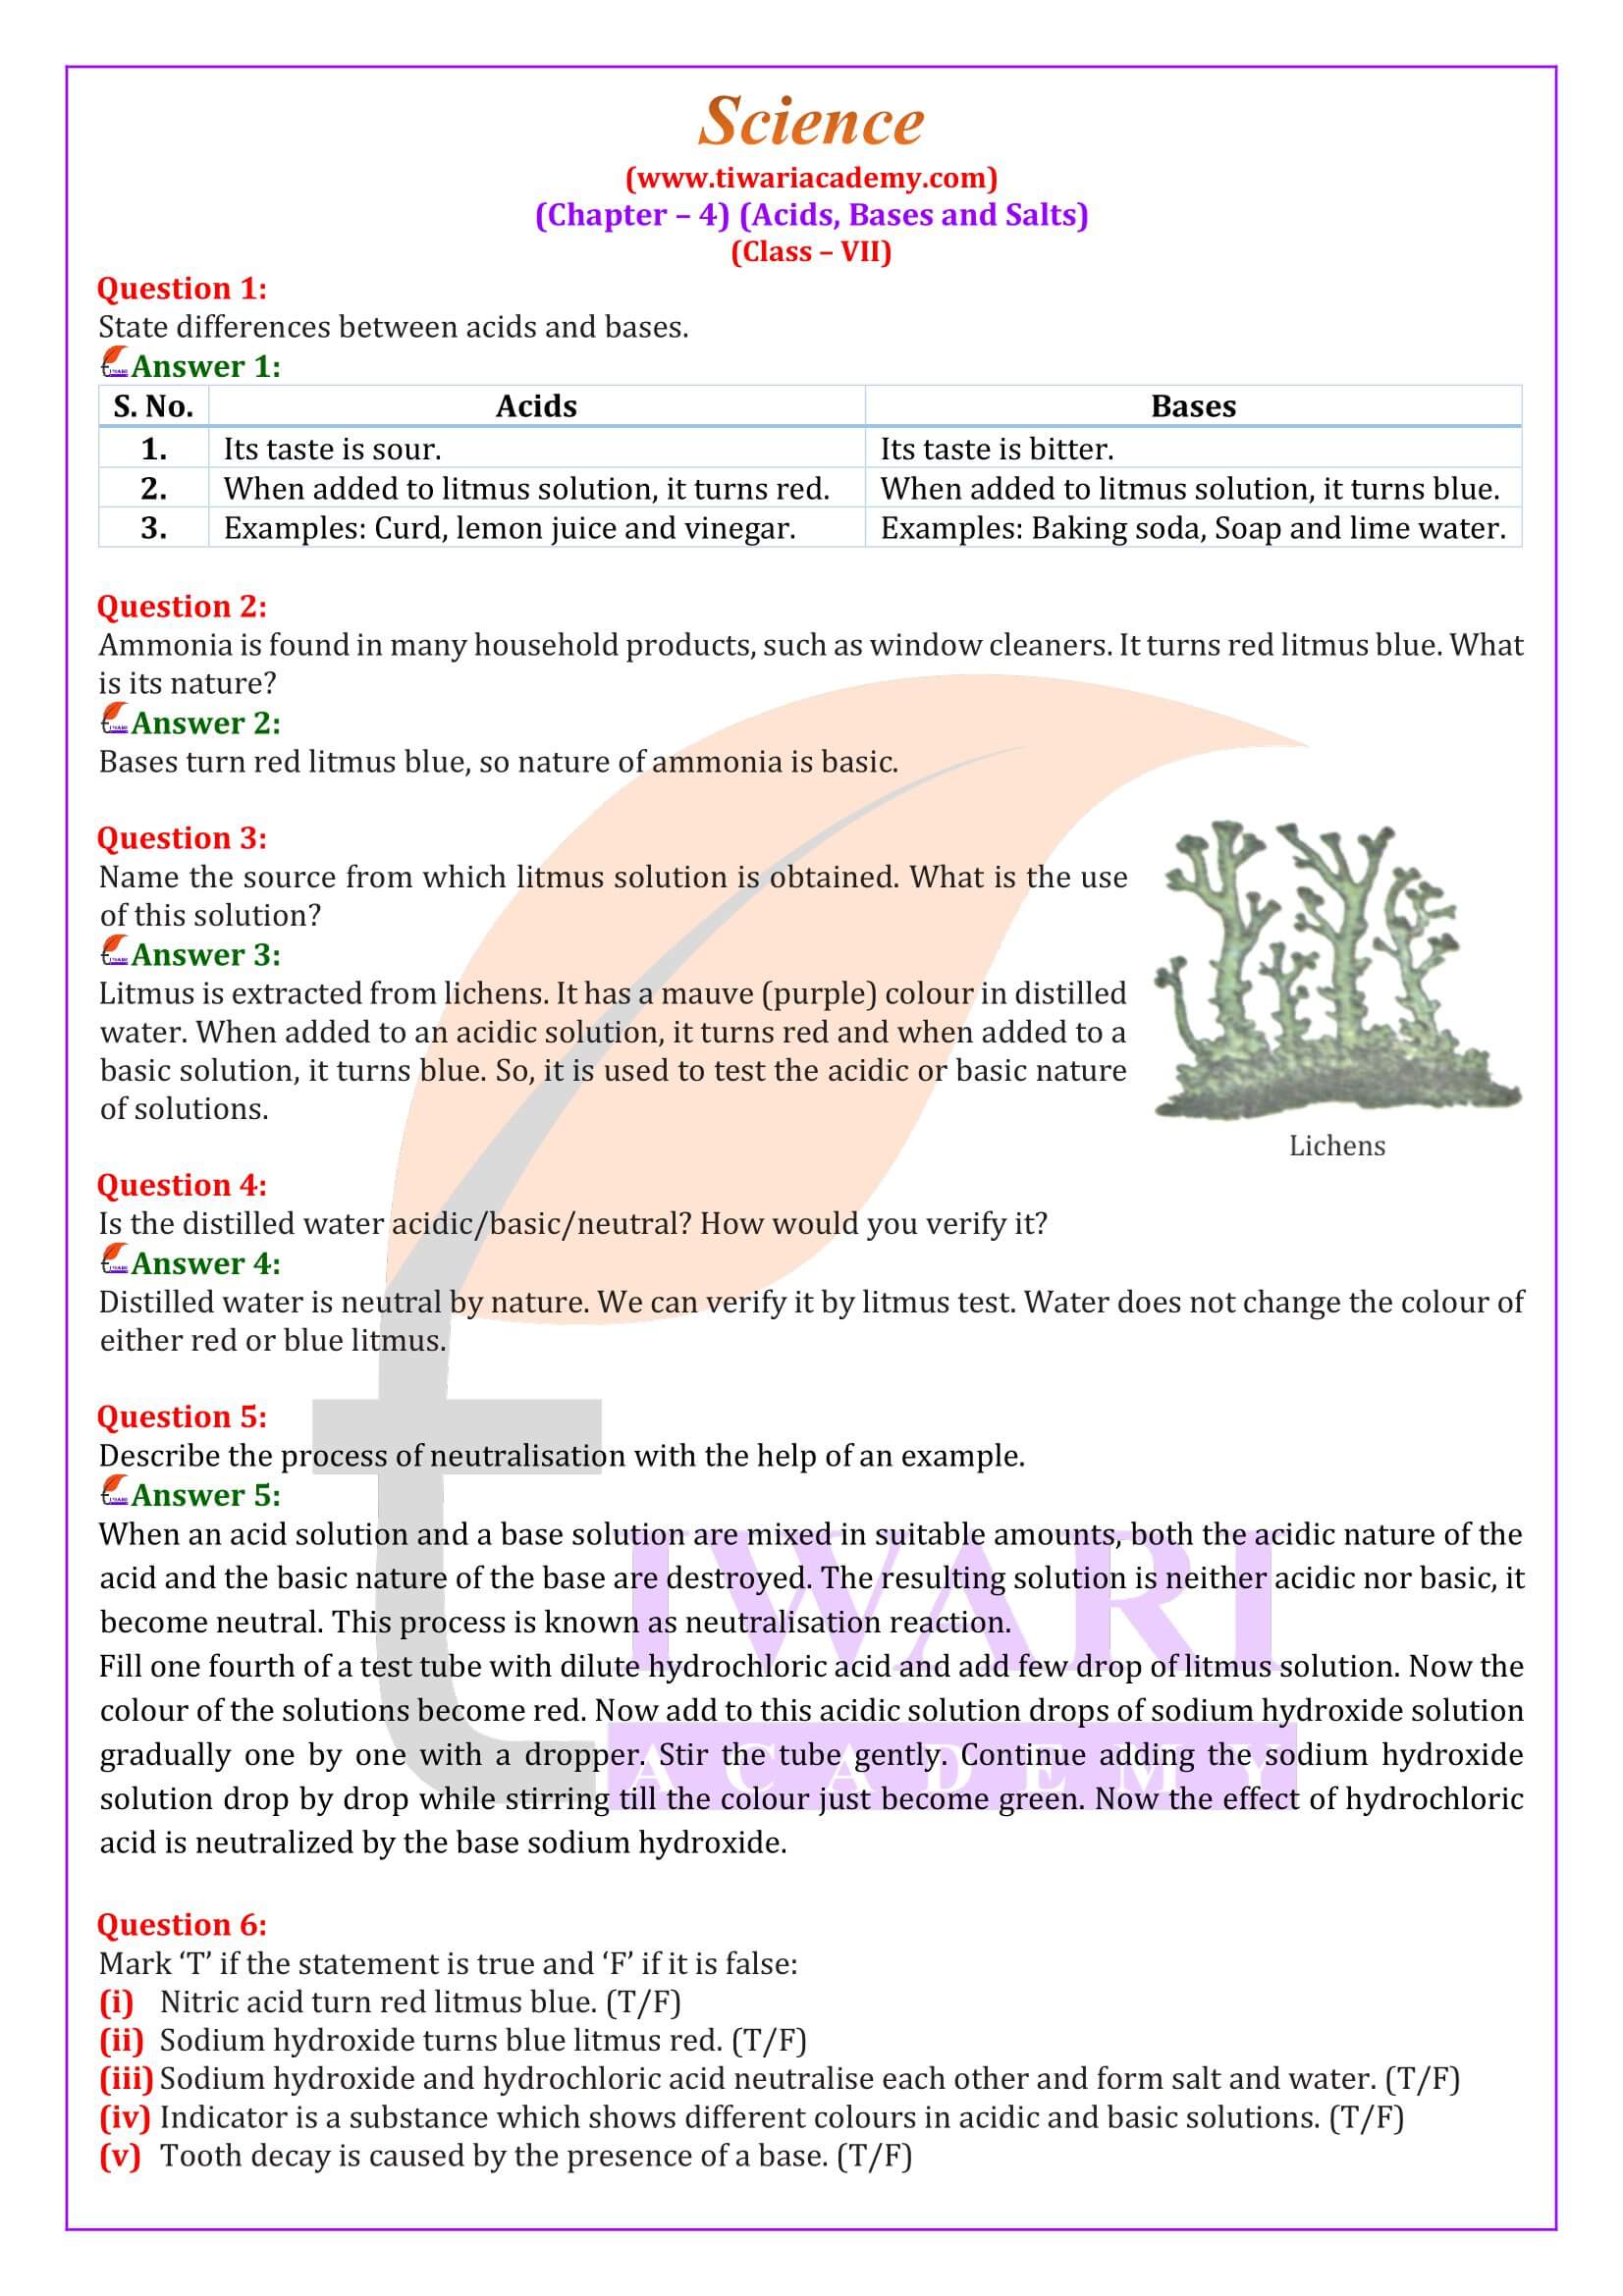 NCERT Solutions for Class 7 Science Chapter 4 in English Medium